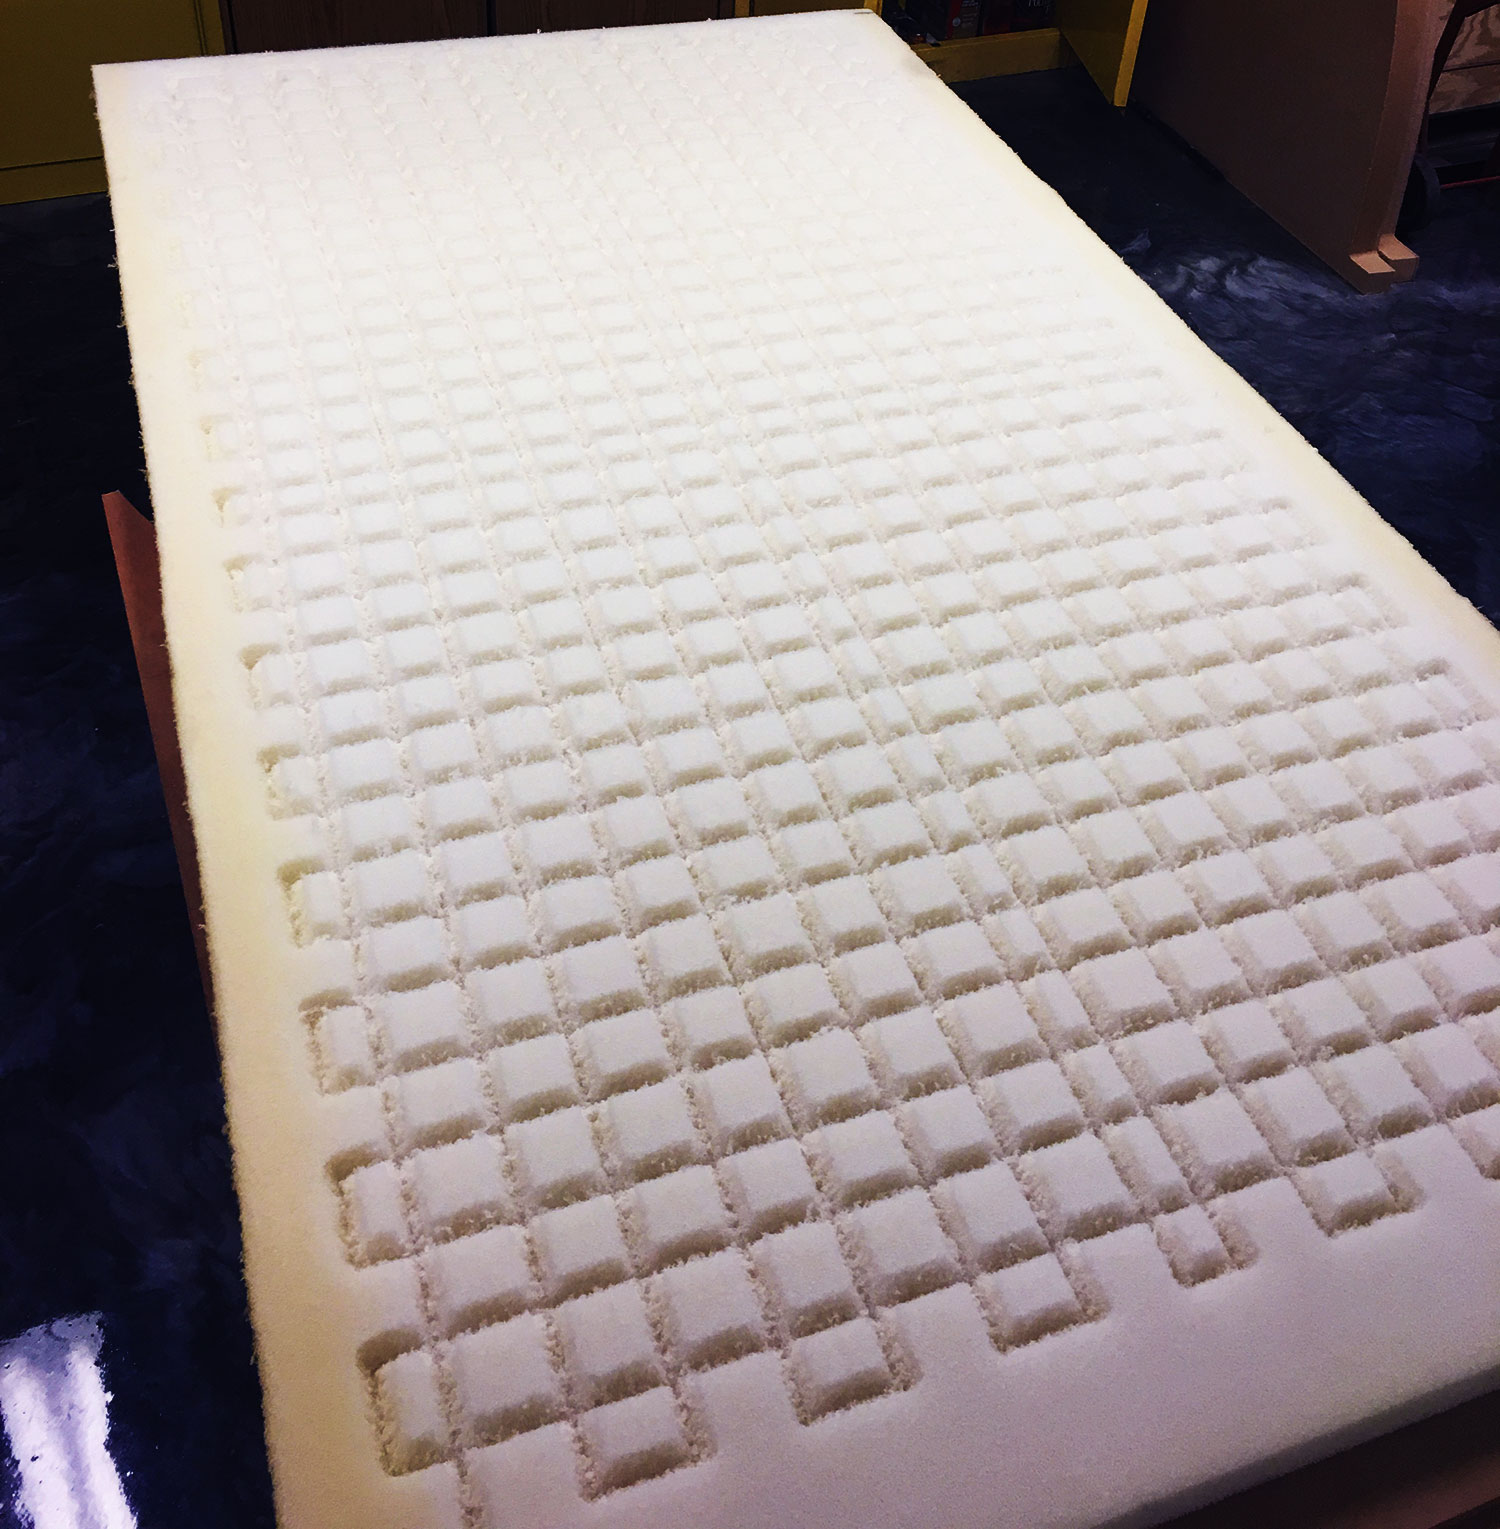 styrofoam piece with cnc cut squares in it.